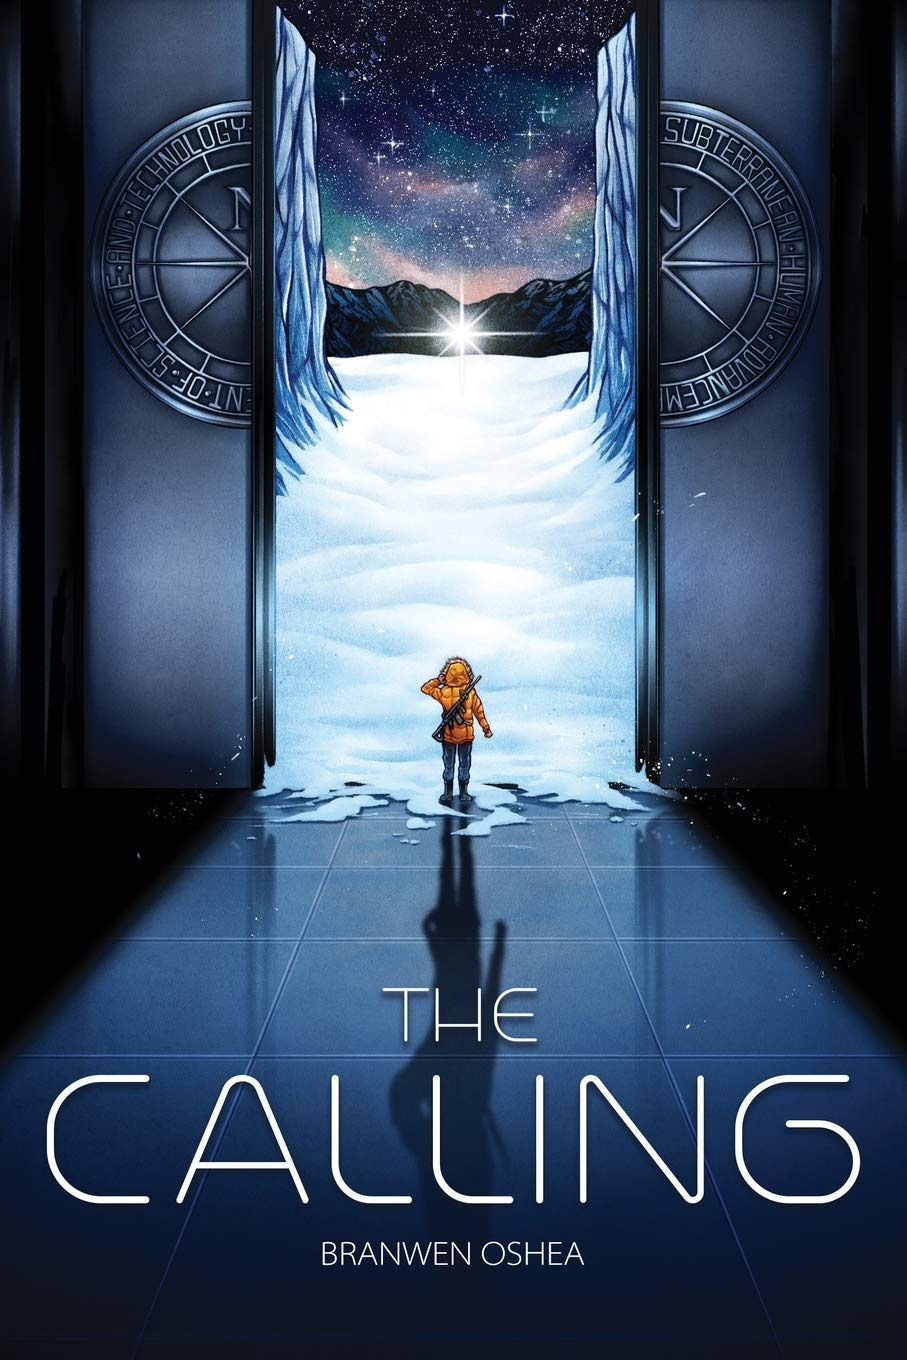 The Calling by Branwen OShea cover. A huge door open to the expanse of snow and a starry sky, mountains in the background. A small person in warm clothes with a rifle on their back standing in the doorway, facing the view. Bright light in front of them.